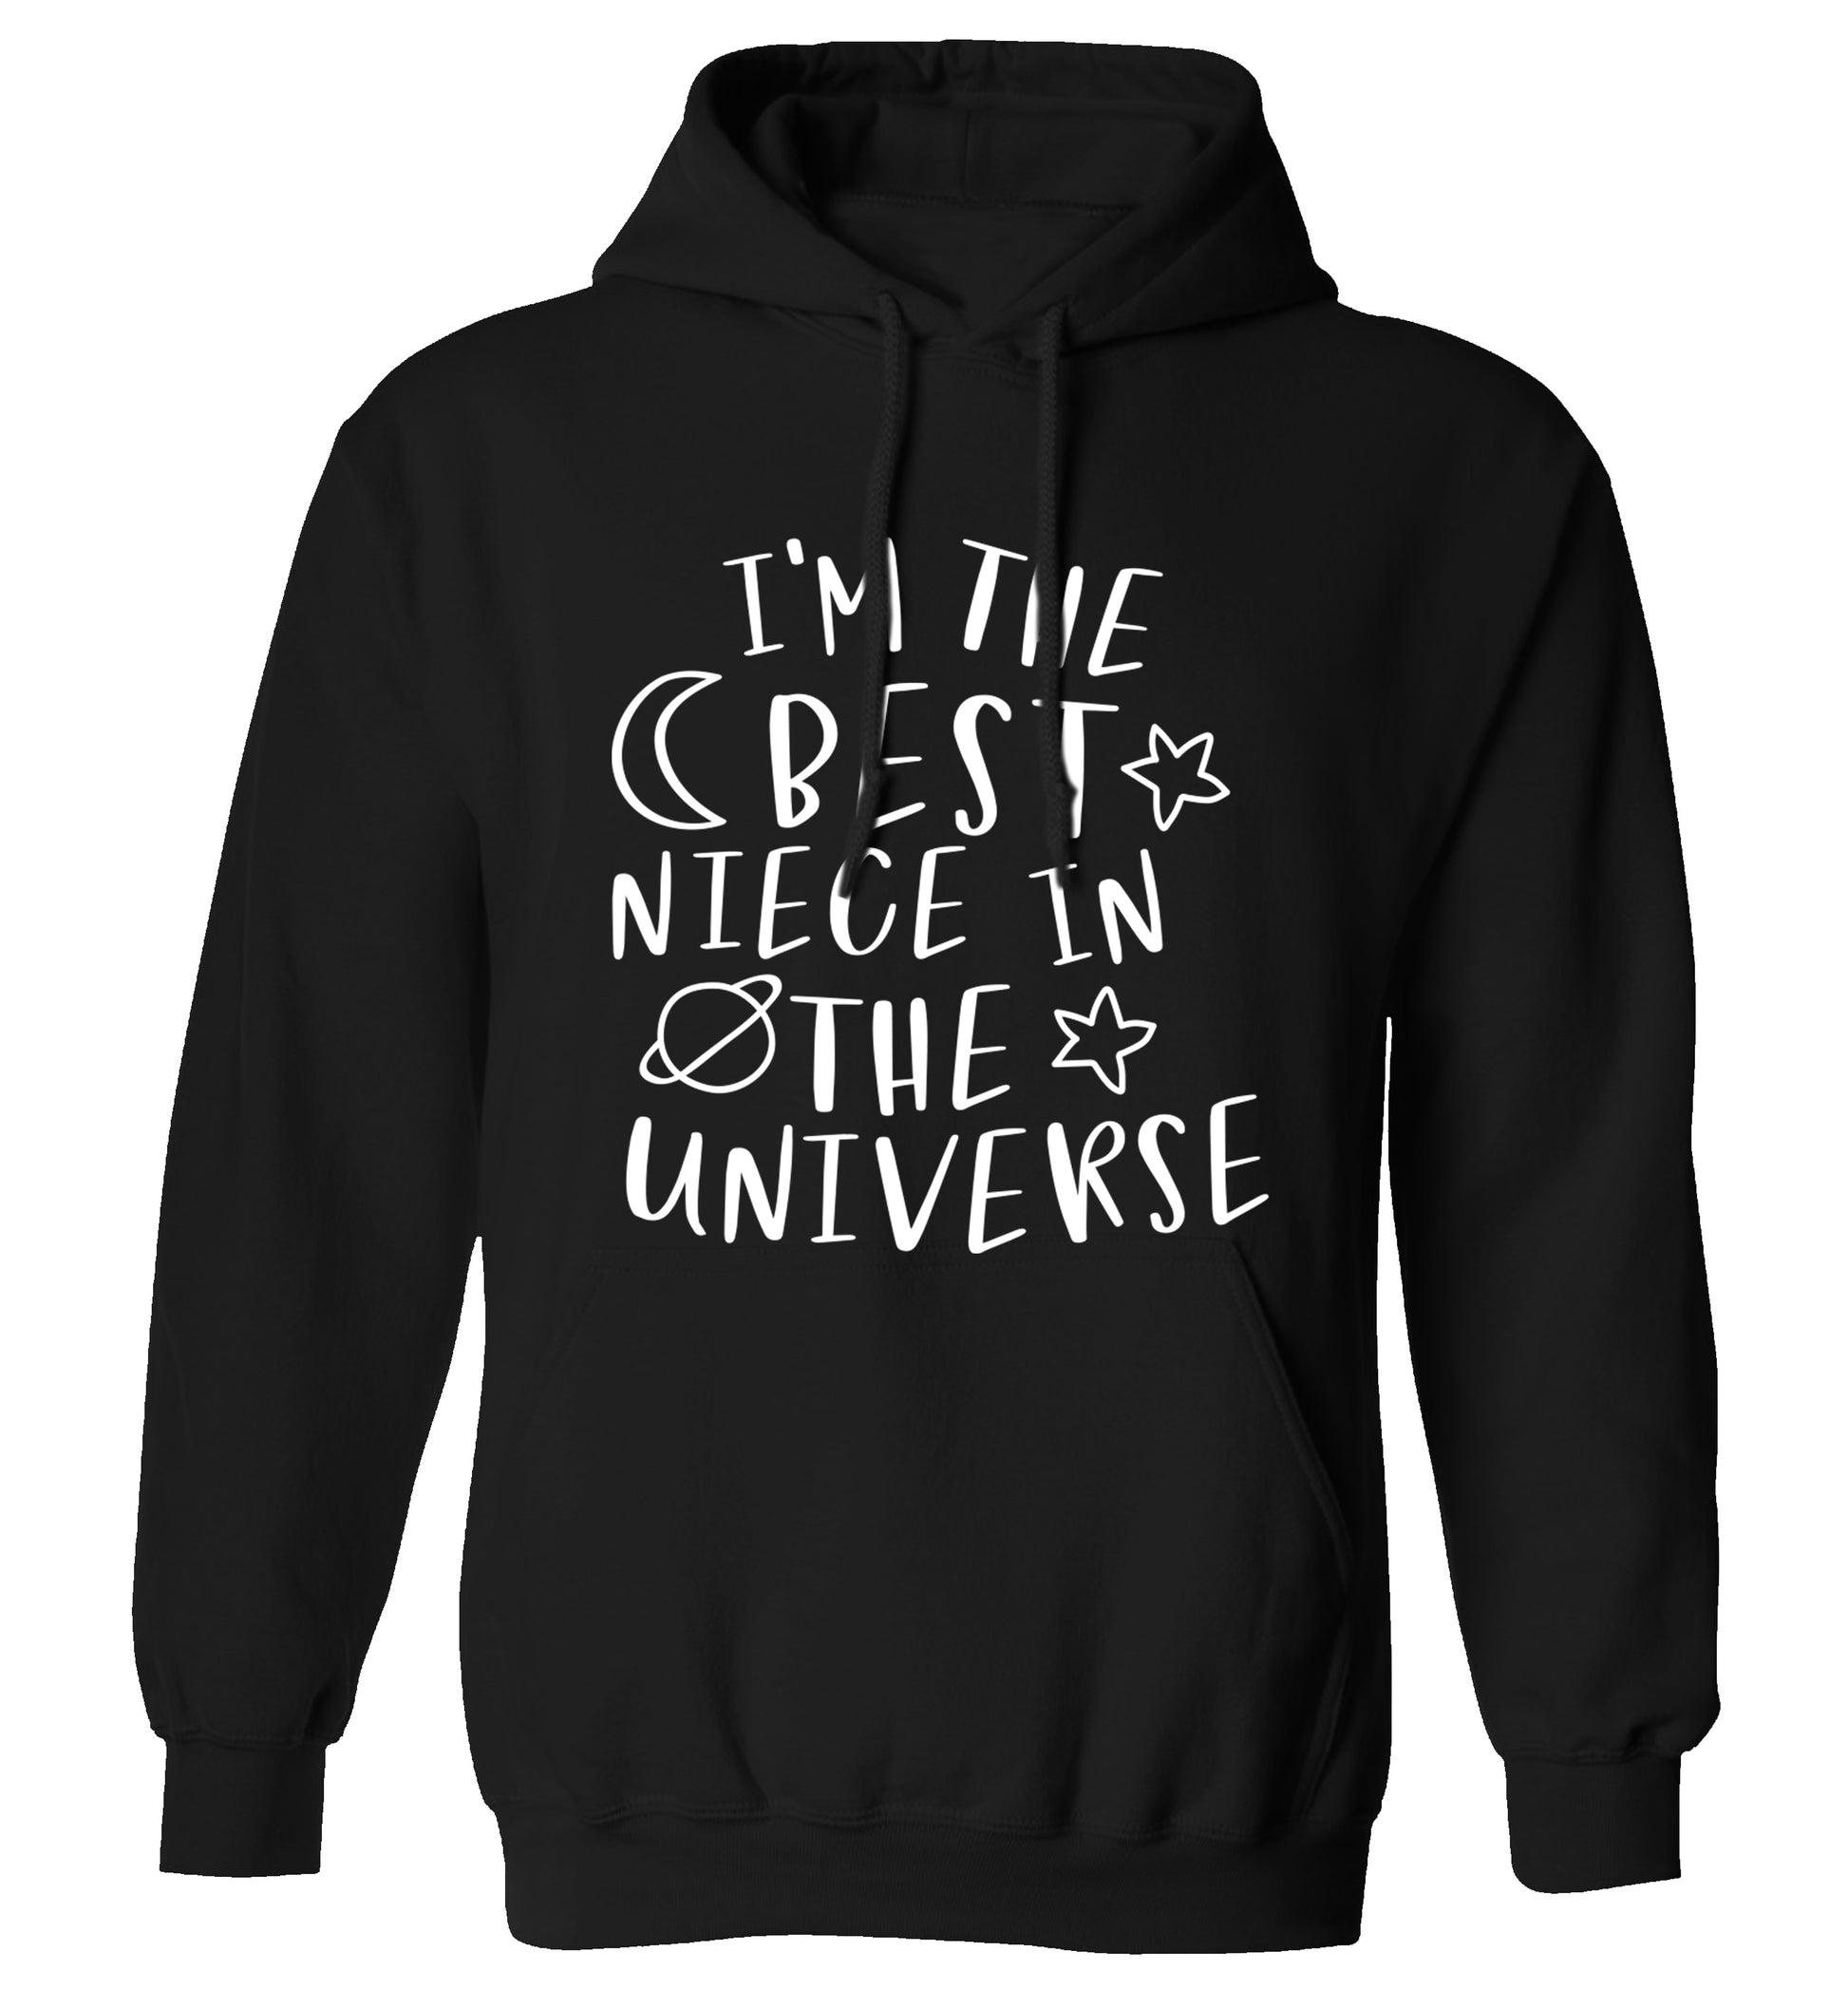 I'm the best niece in the universe adults unisex black hoodie 2XL